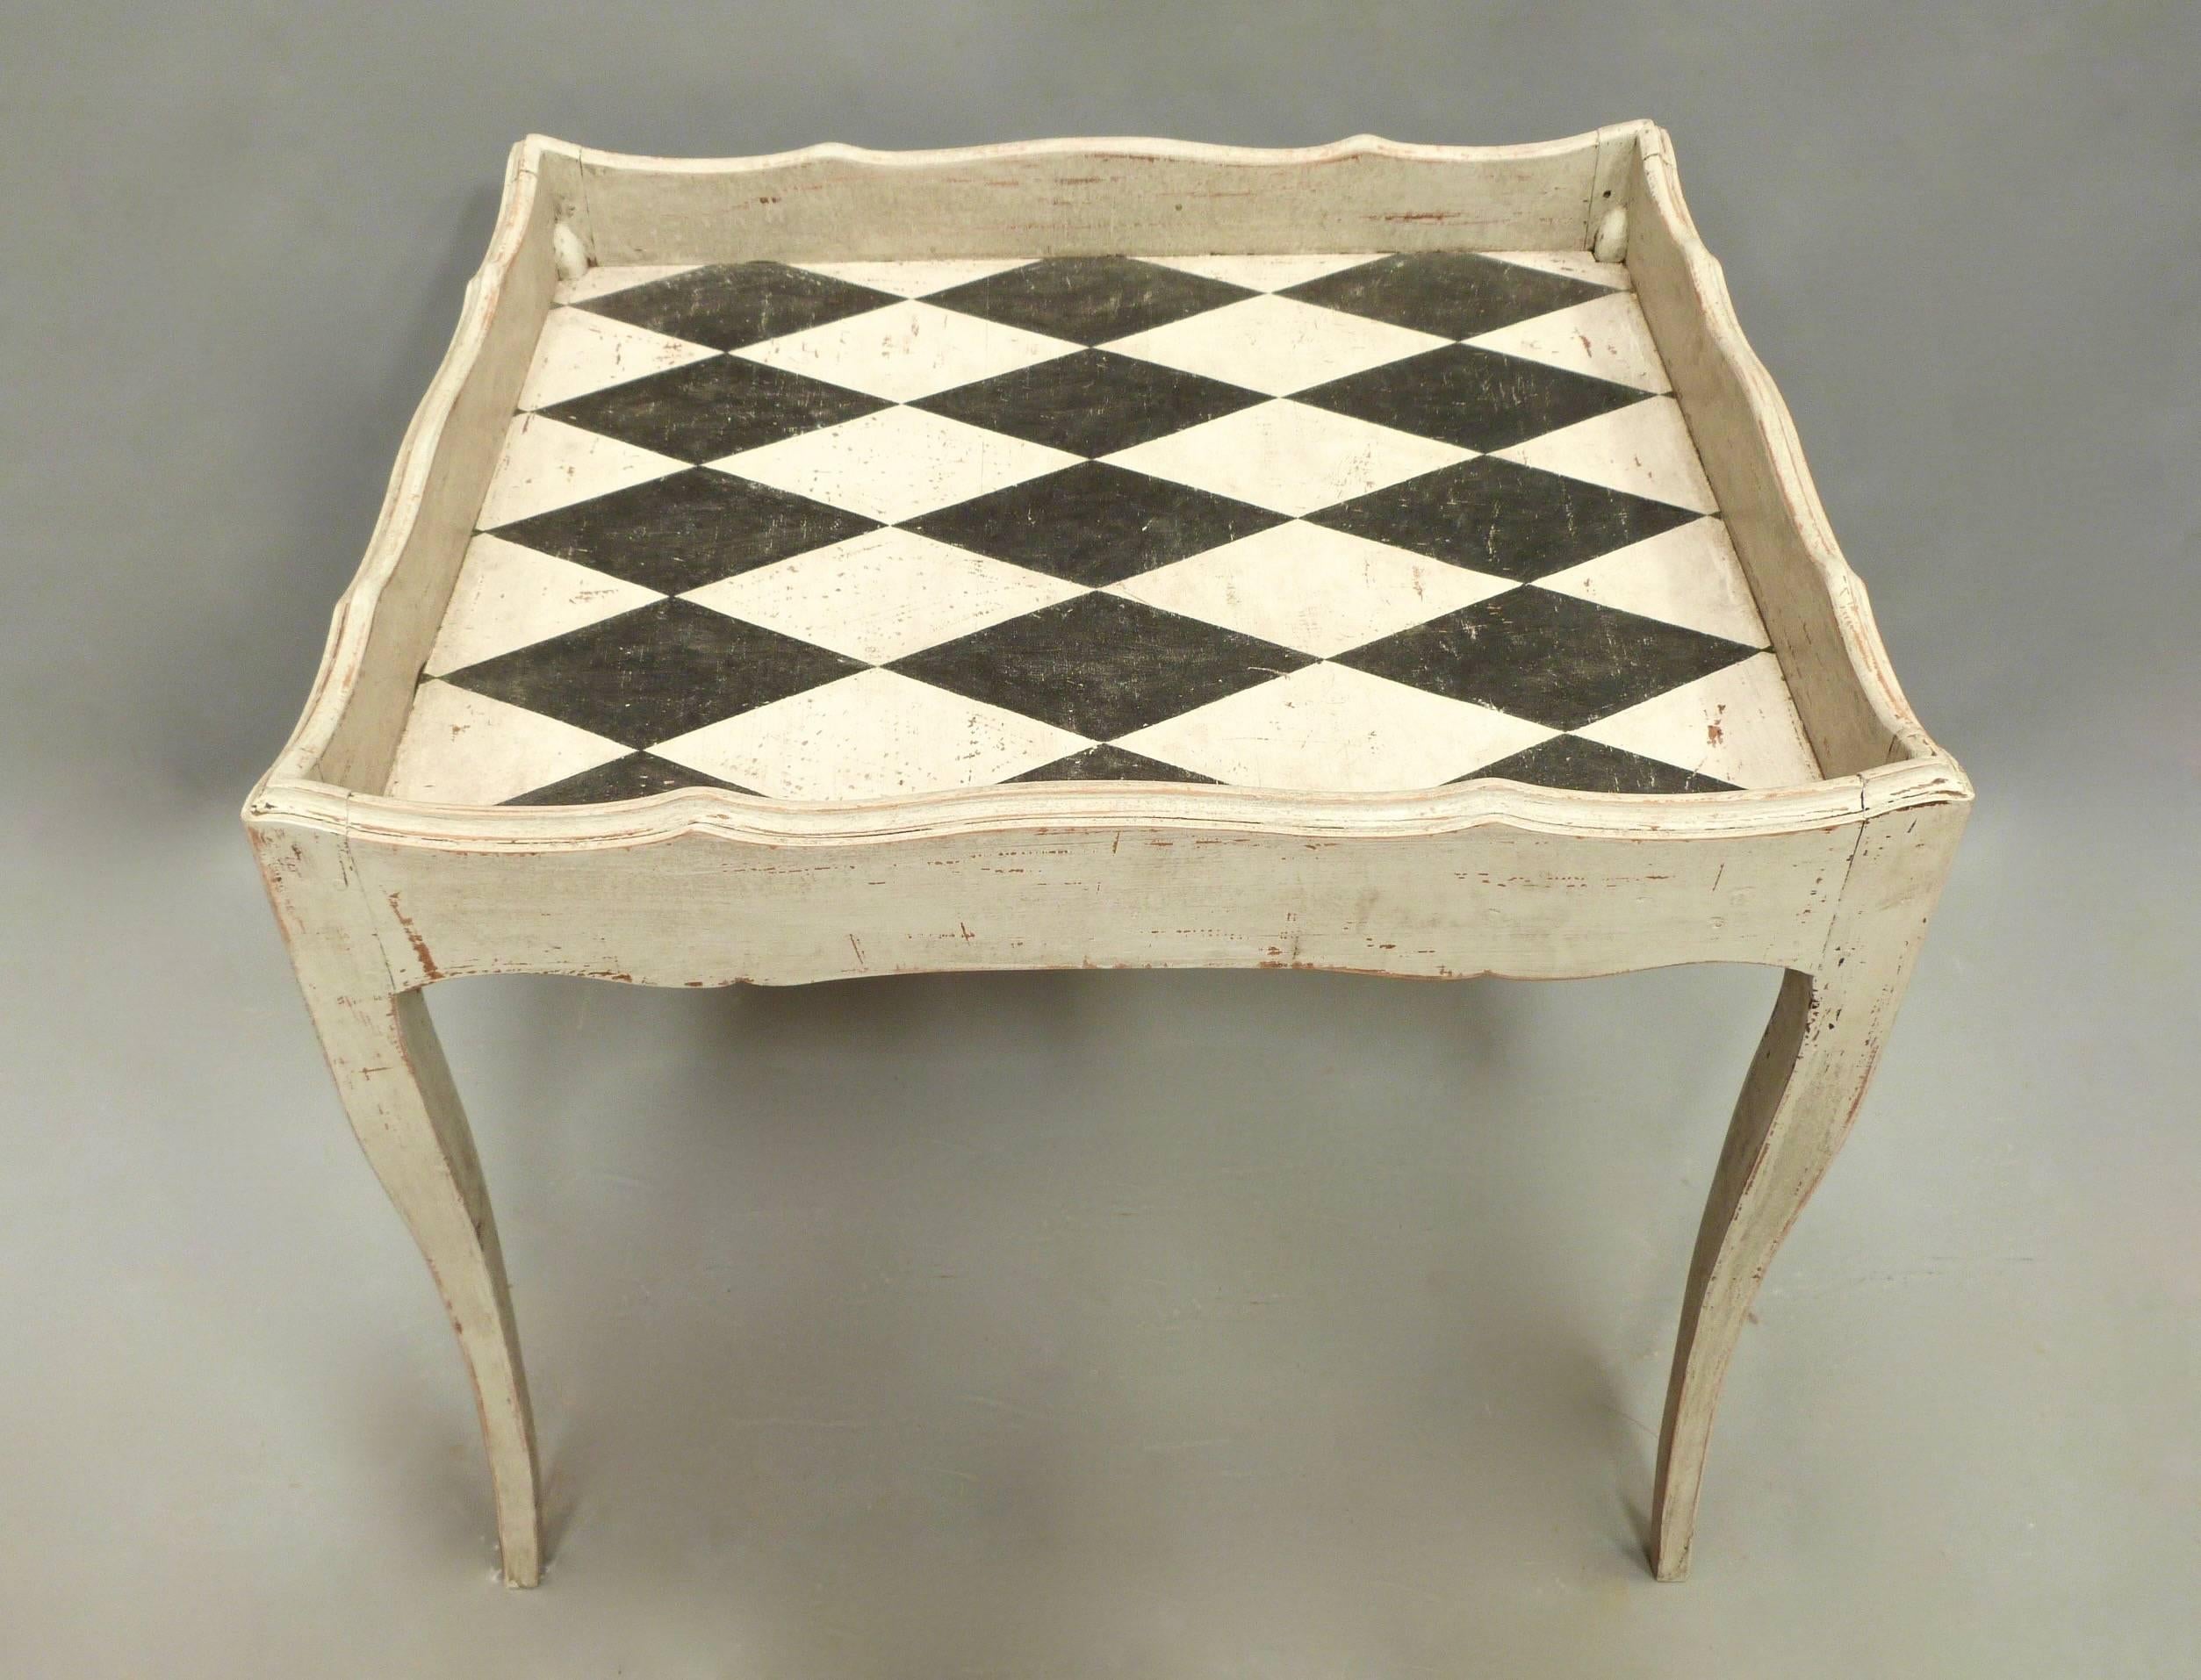 An early 20th century French painted wine table with later Harlequin painted top.